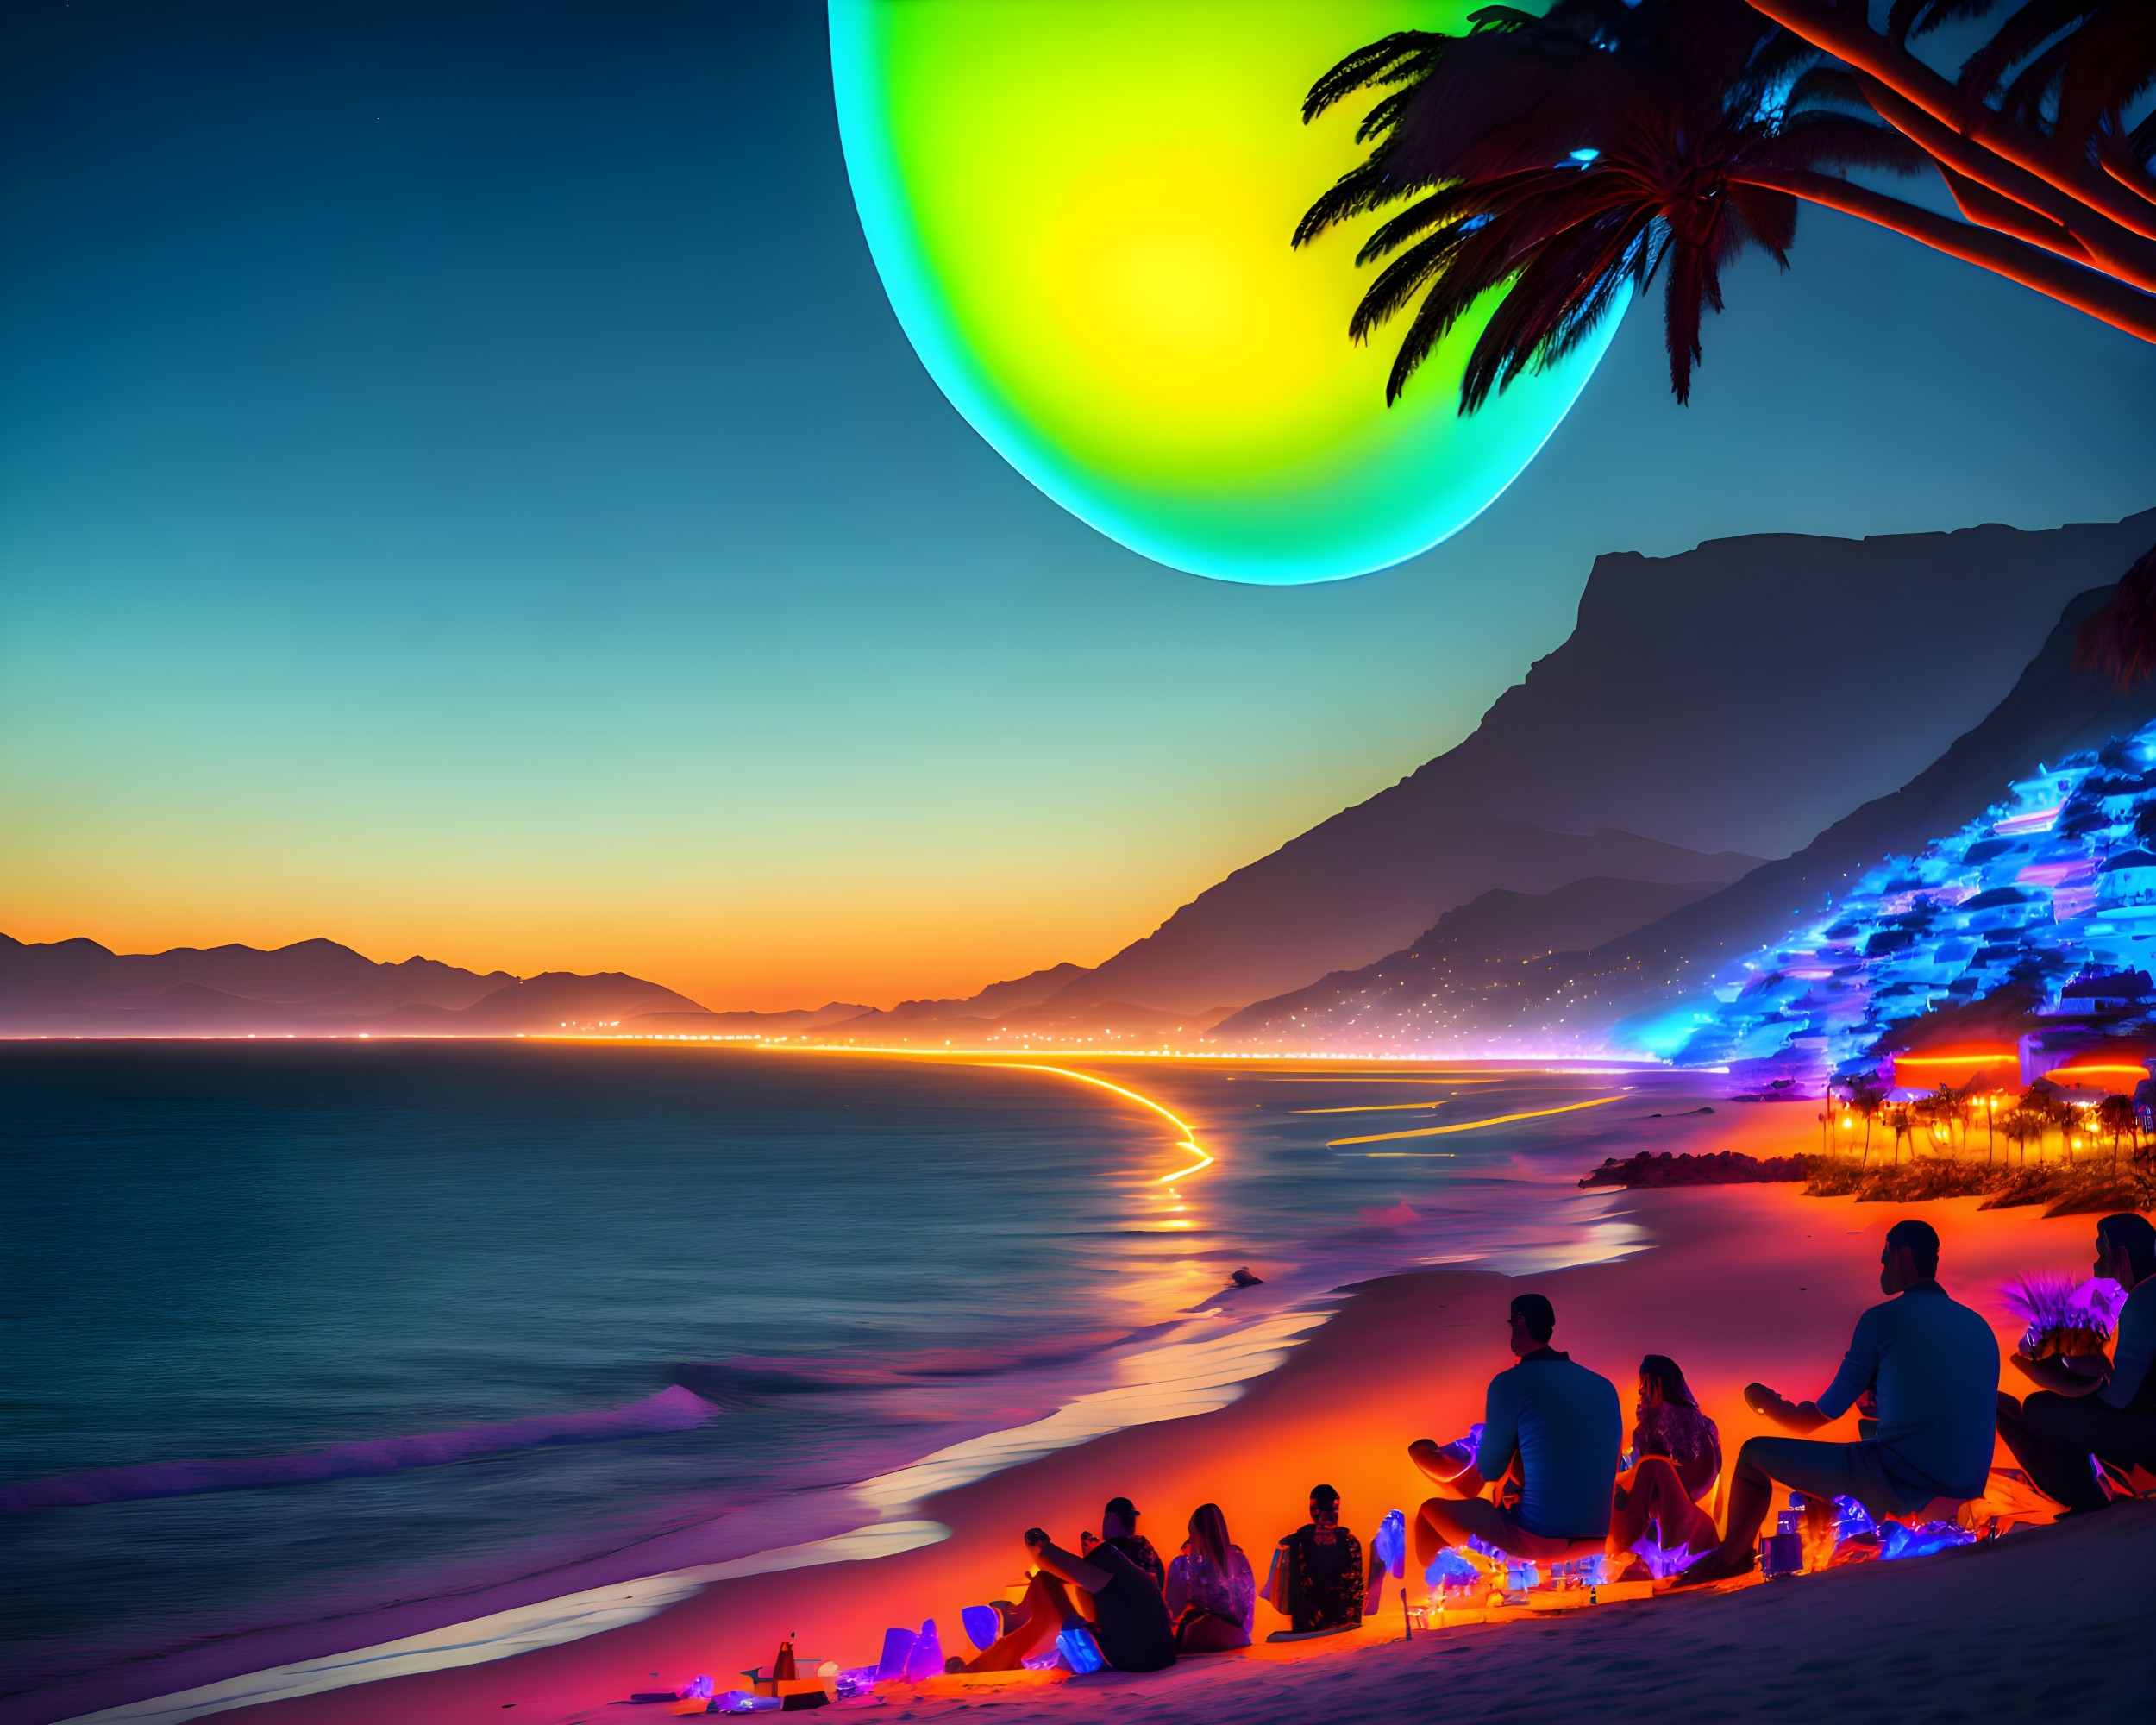 A seaside town illuminated by giant moon